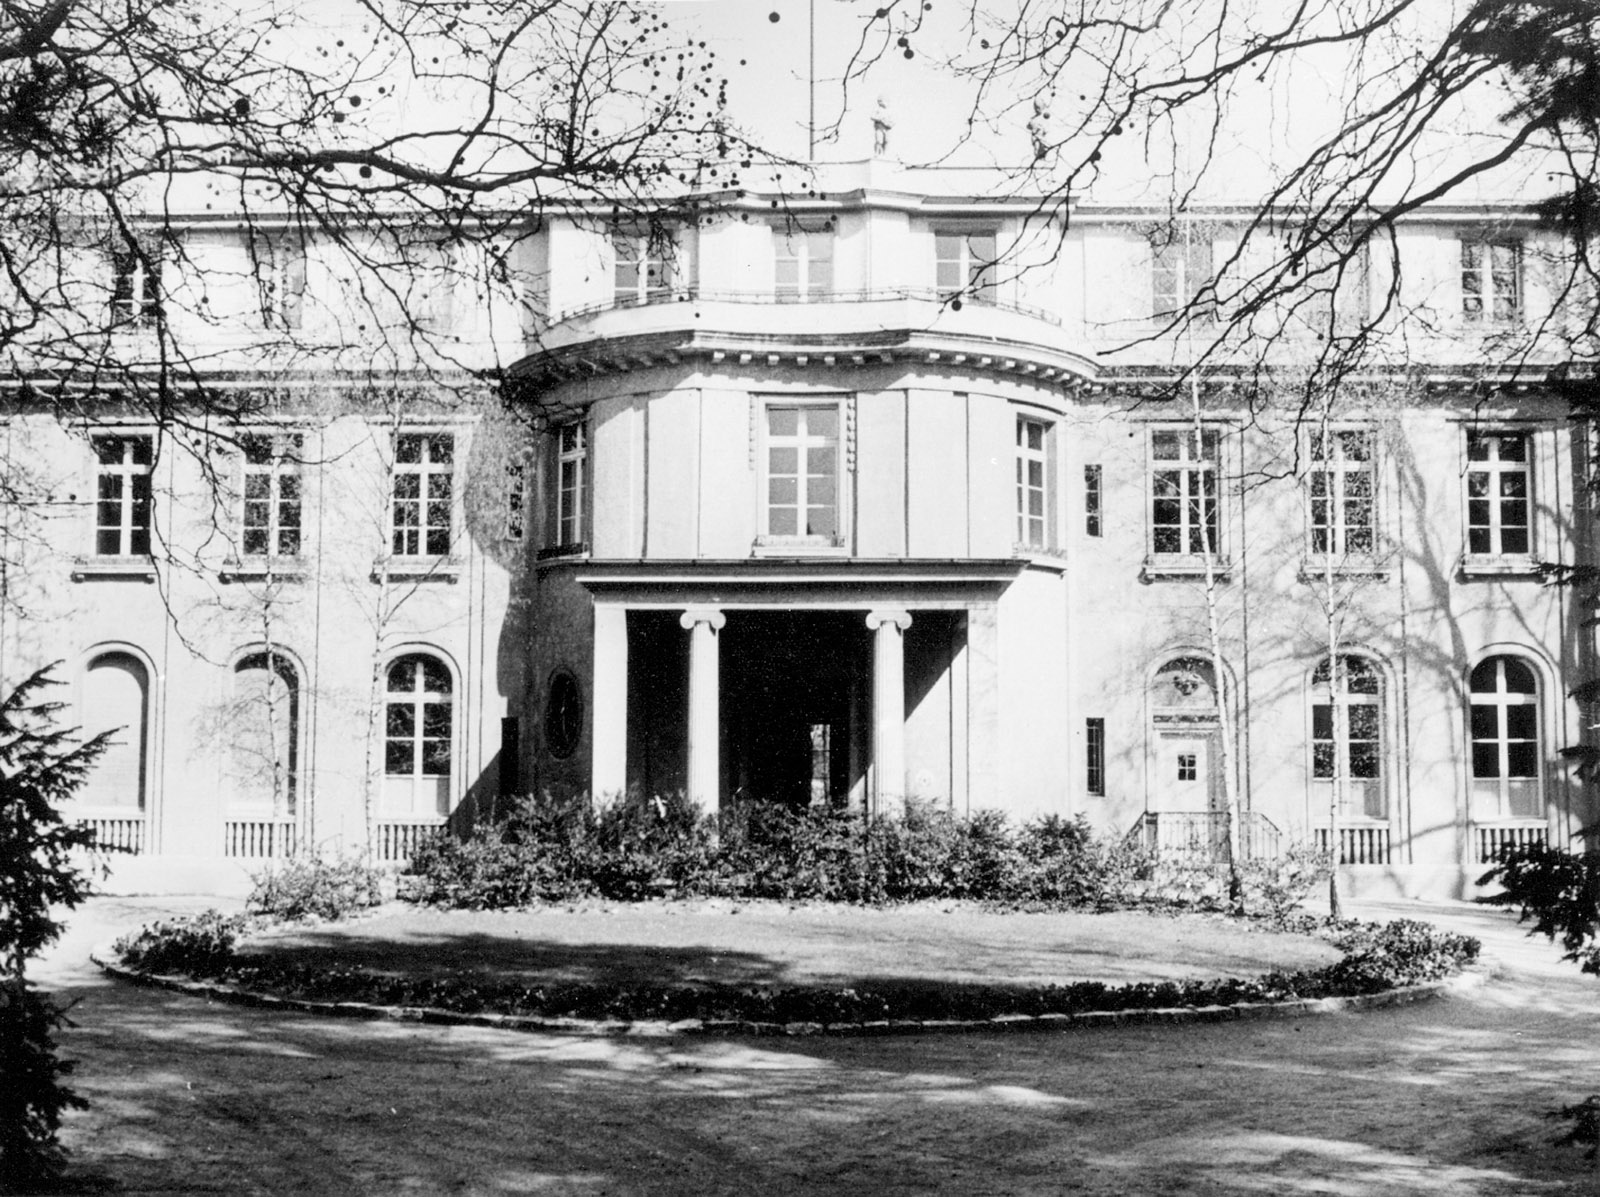 Suburban Berlin villa where the Wannsee Conference was held on January 20, 1942